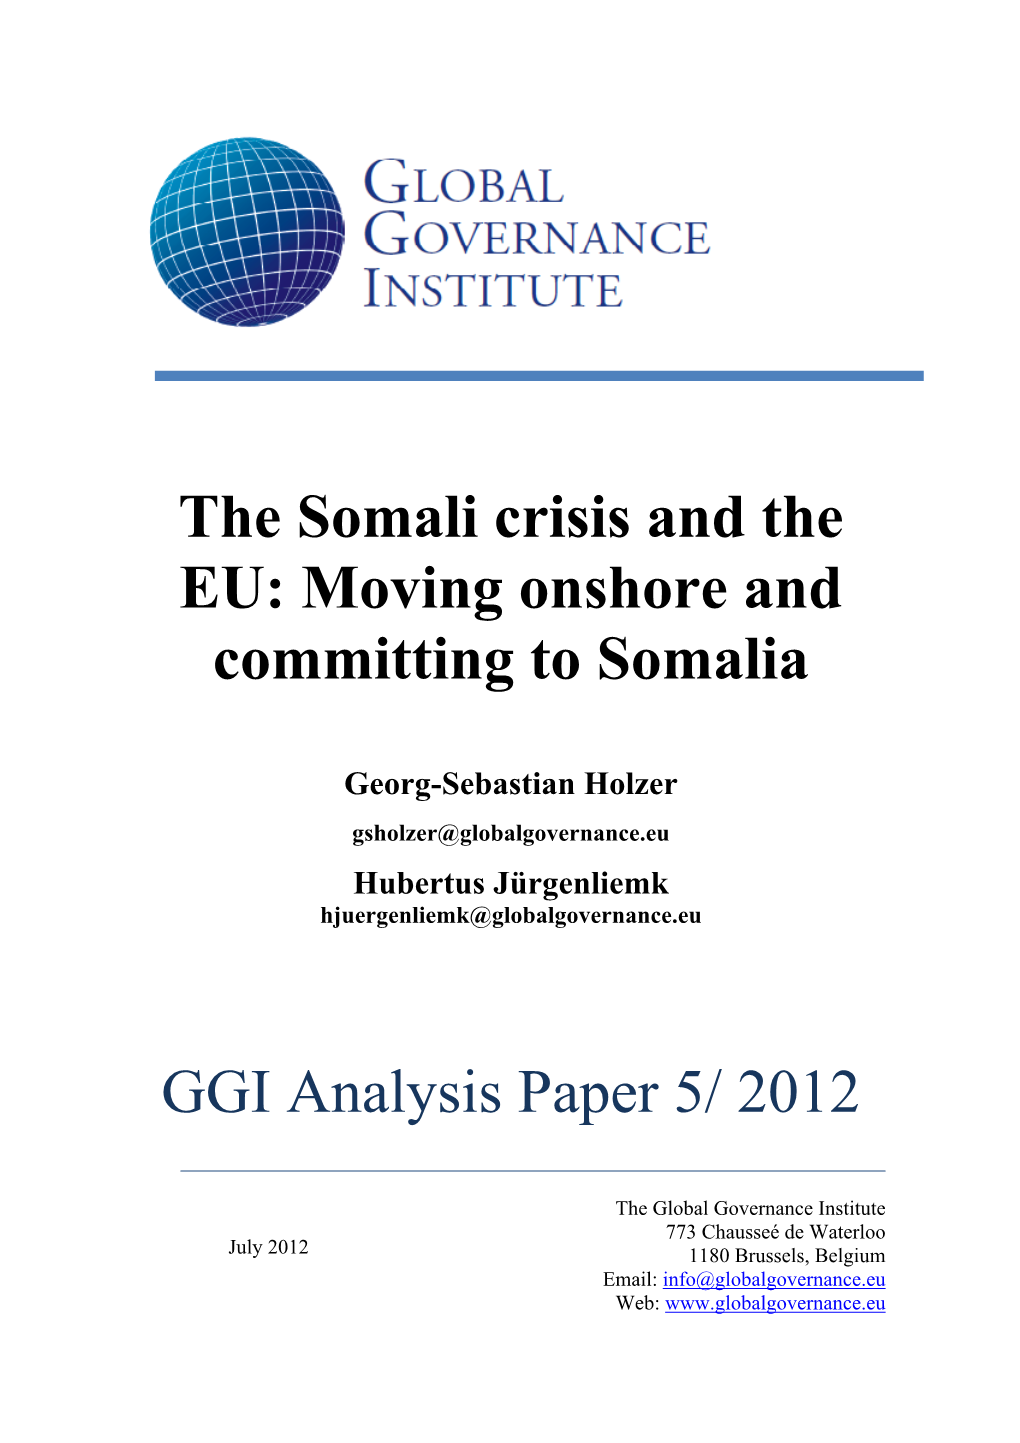 The Somali Crisis and the EU: Moving Onshore and Committing to Somalia